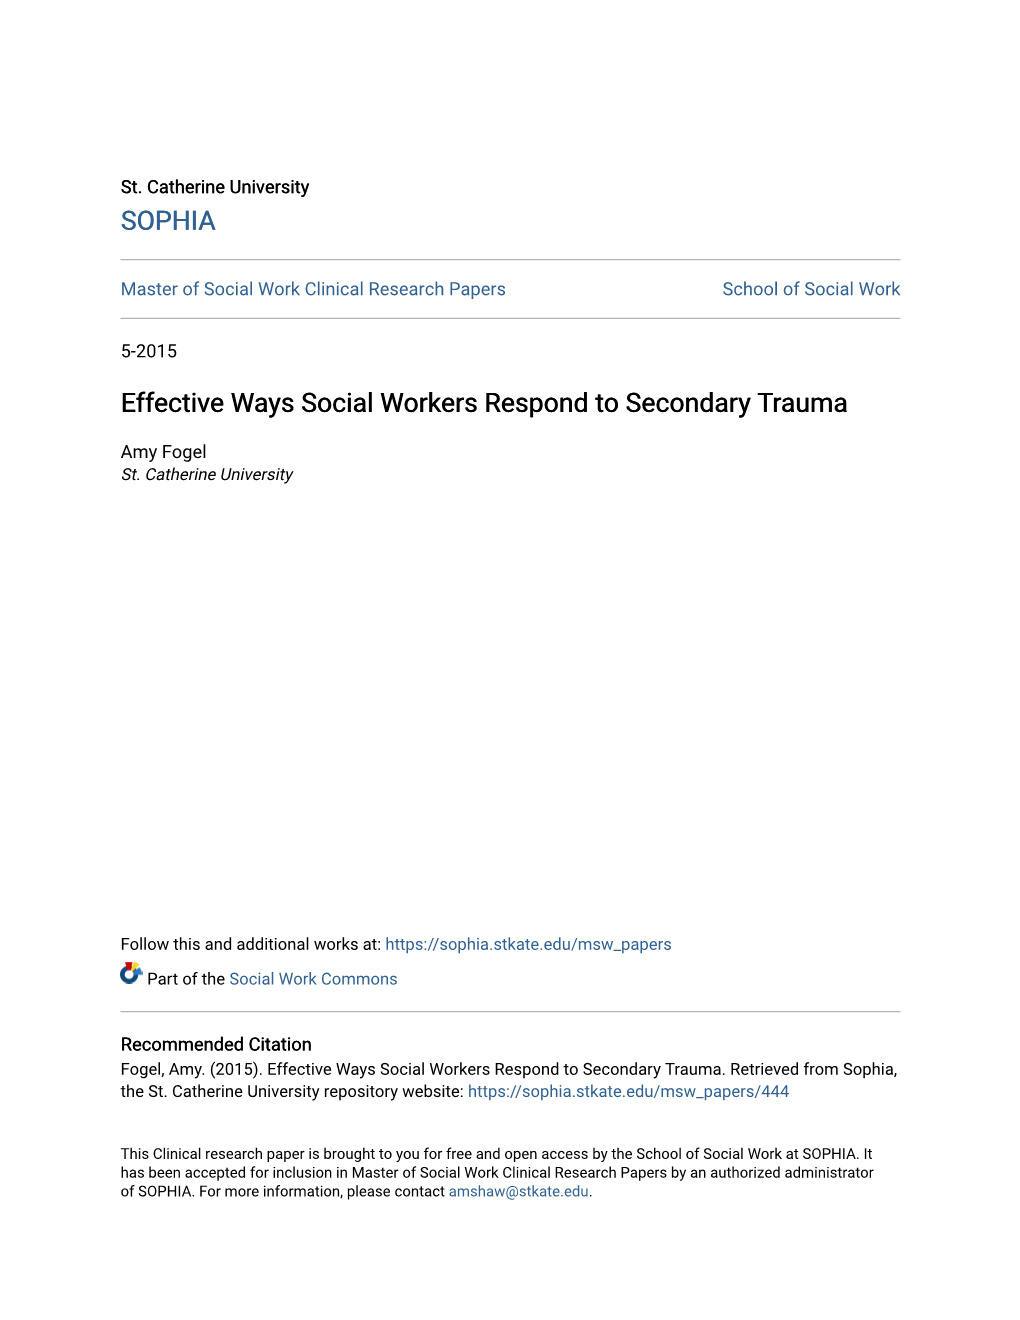 Effective Ways Social Workers Respond to Secondary Trauma